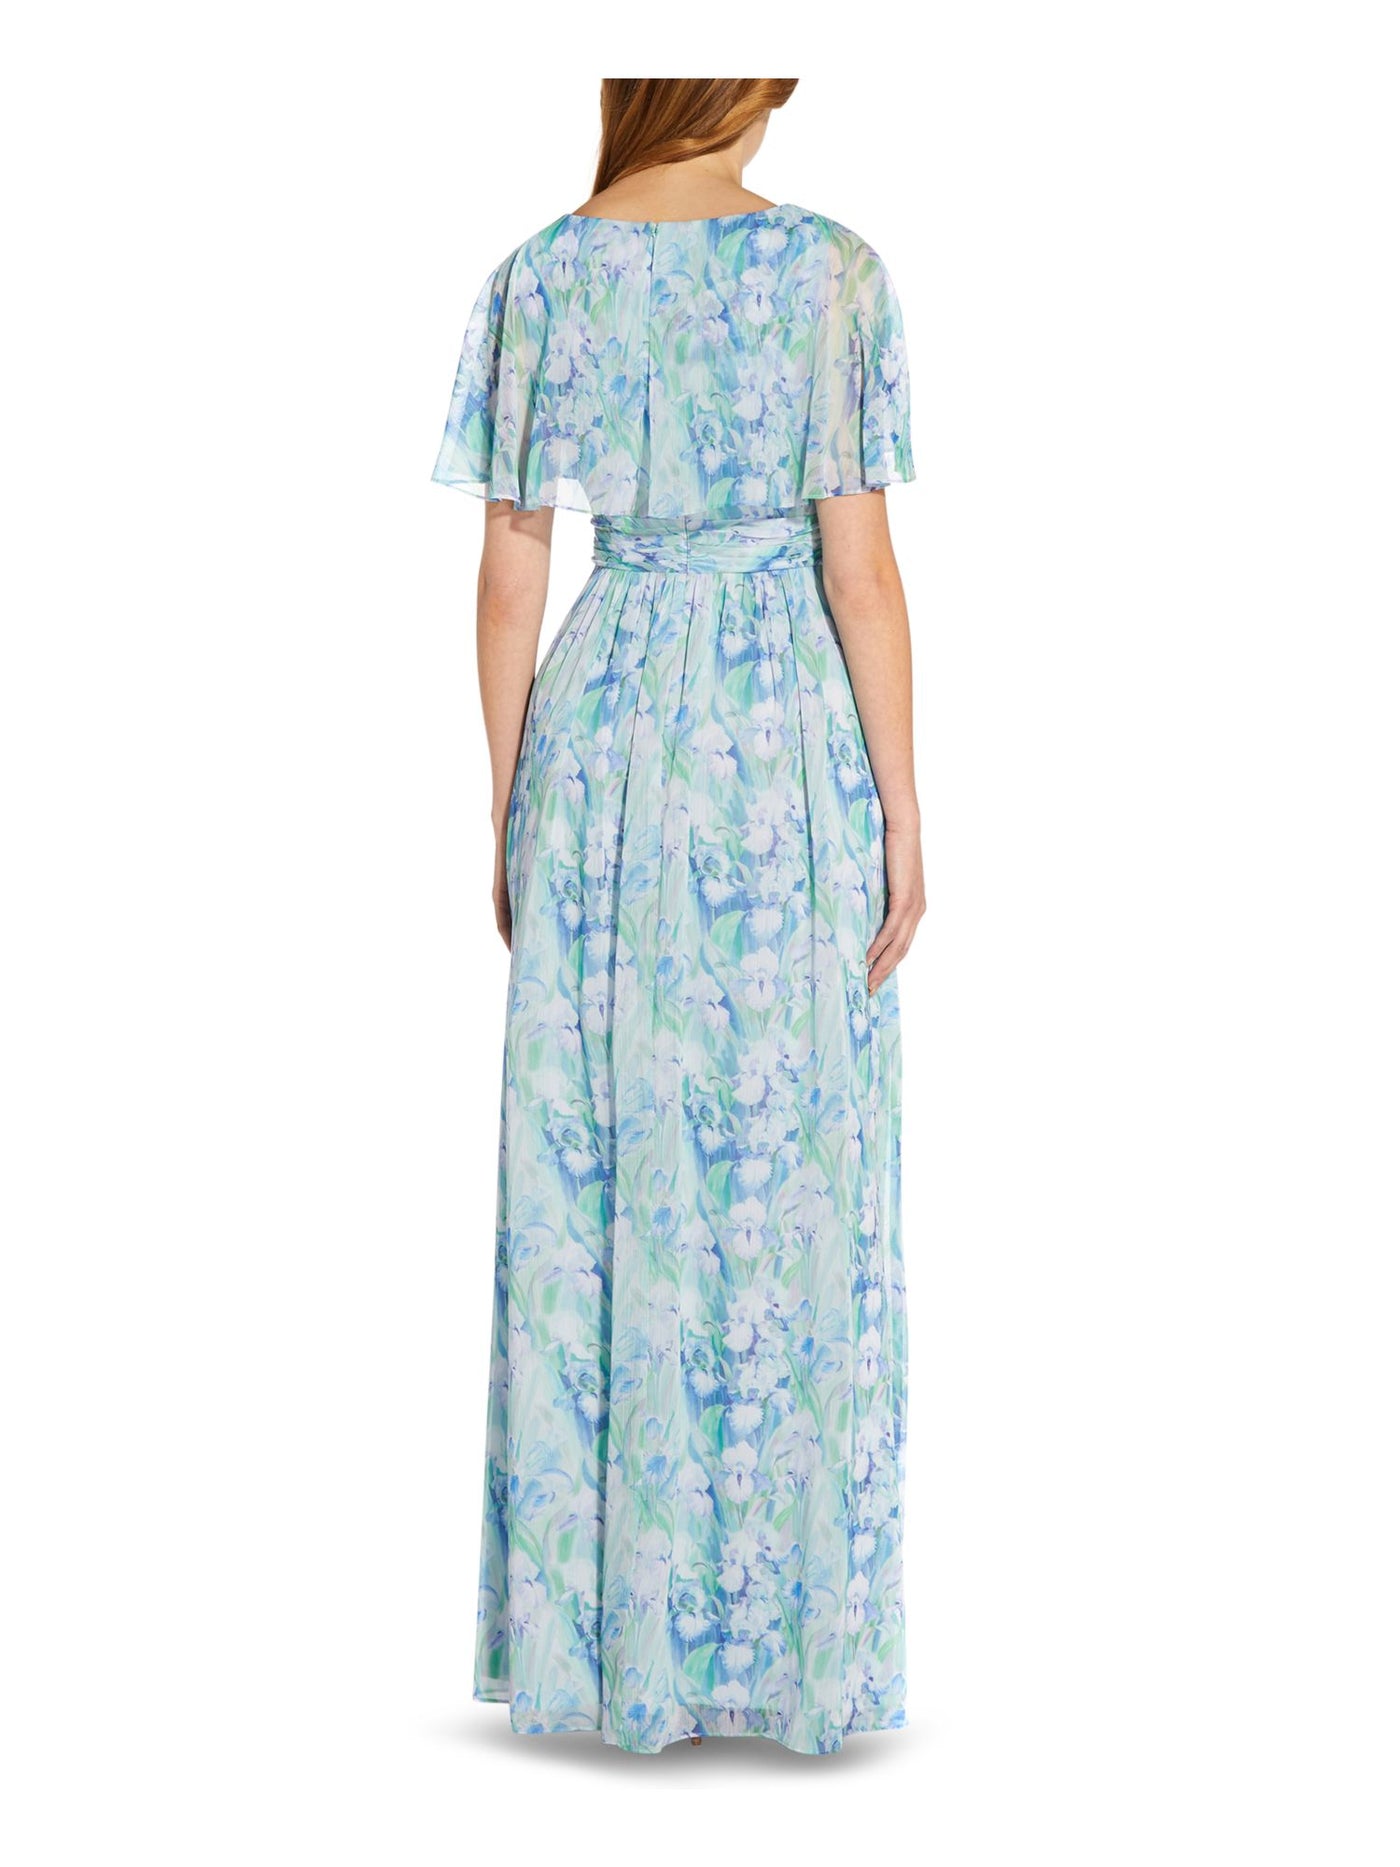 ADRIANNA PAPELL Womens Blue Zippered Pleated Lined Sheer Cape Overlay Ruffled Floral Short Sleeve V Neck Full-Length Gown Dress 2